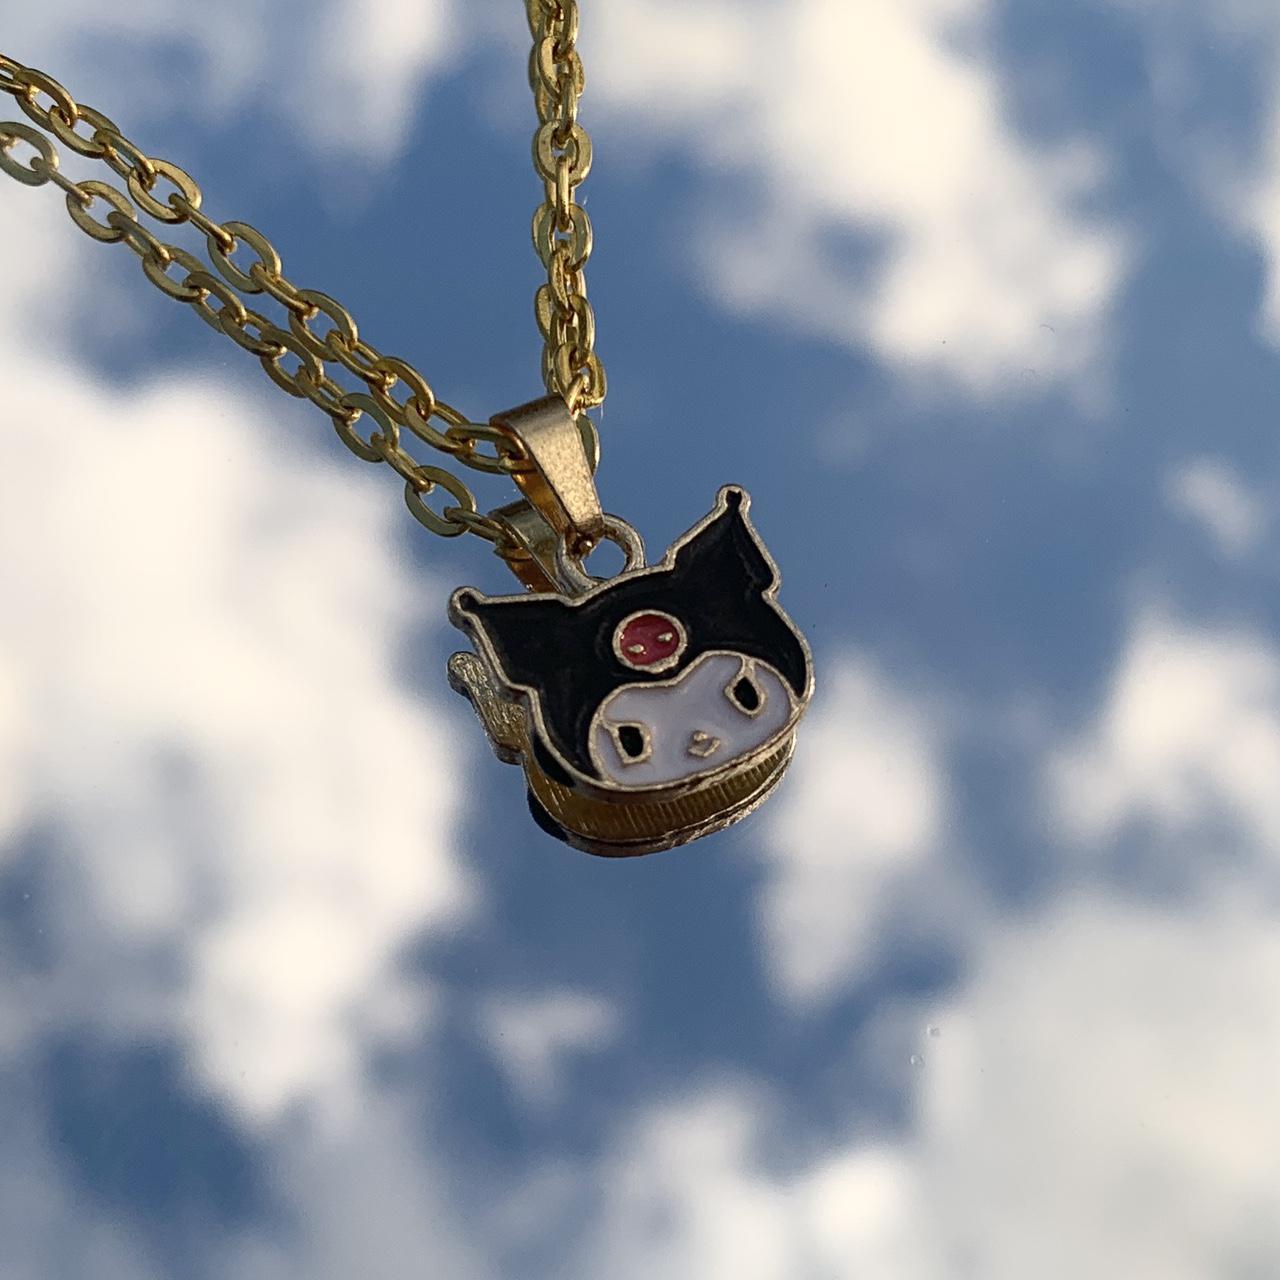 Product Image 1 - kuromi necklace

• the necklace is